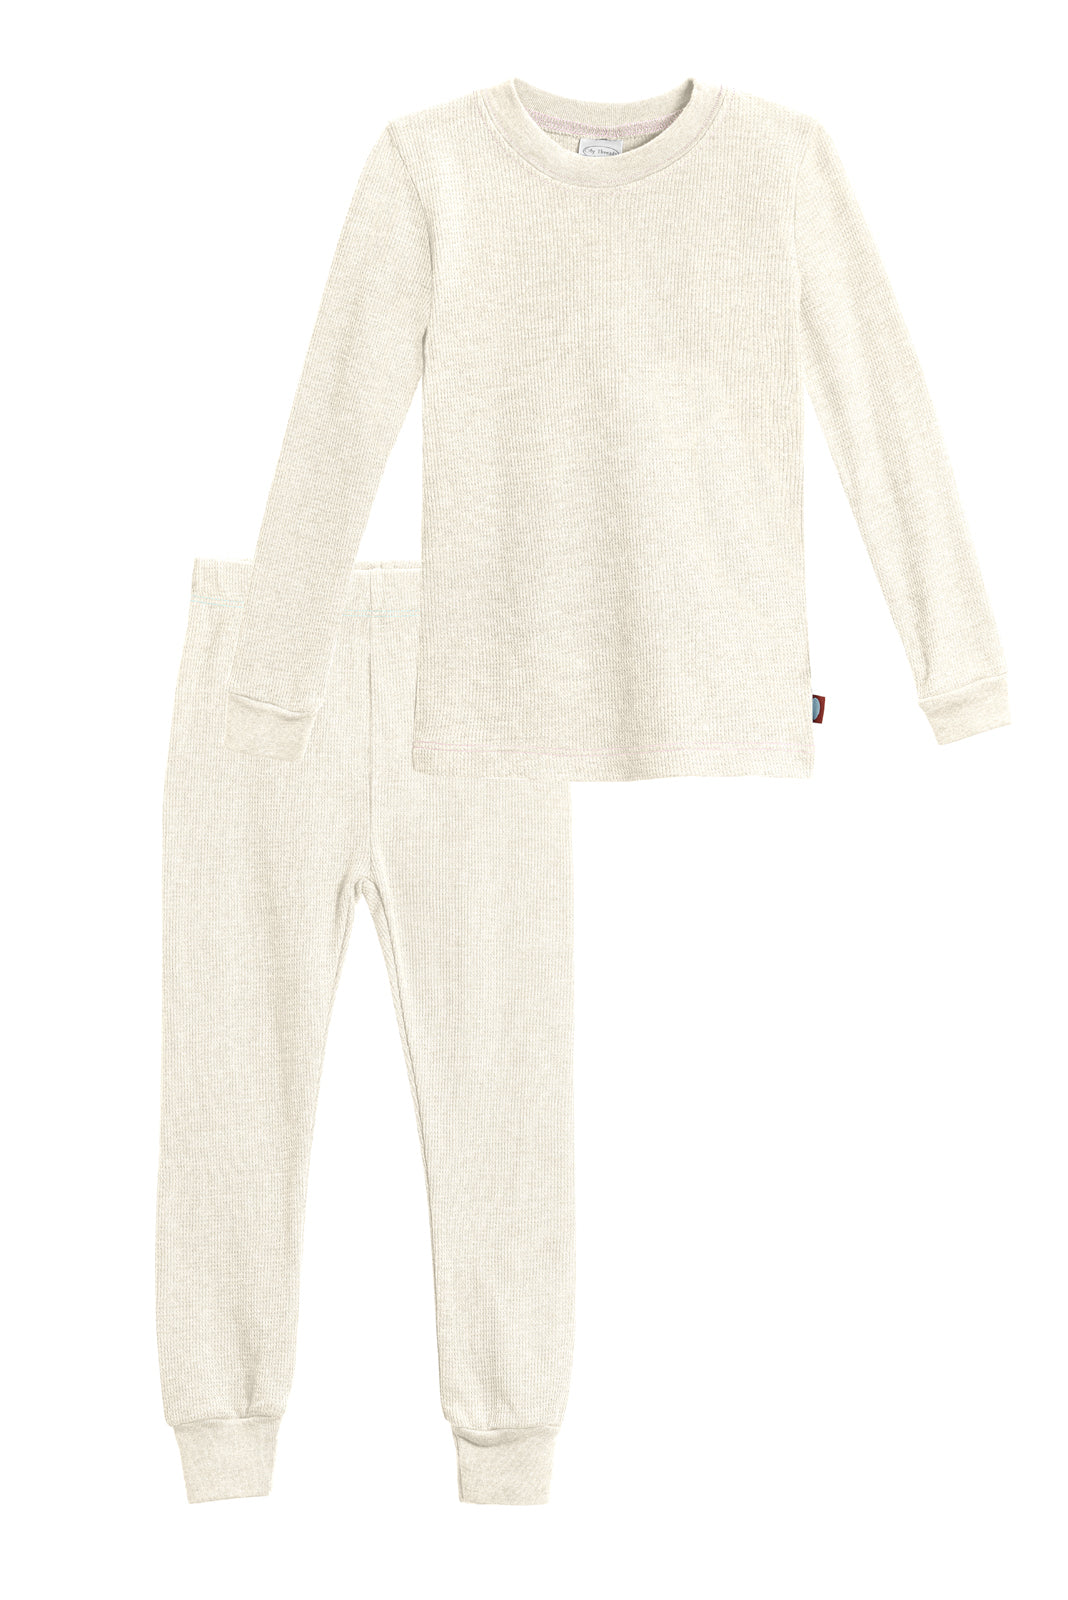 City Threads Boys and Girls Thermal 2-Piece Long Johns